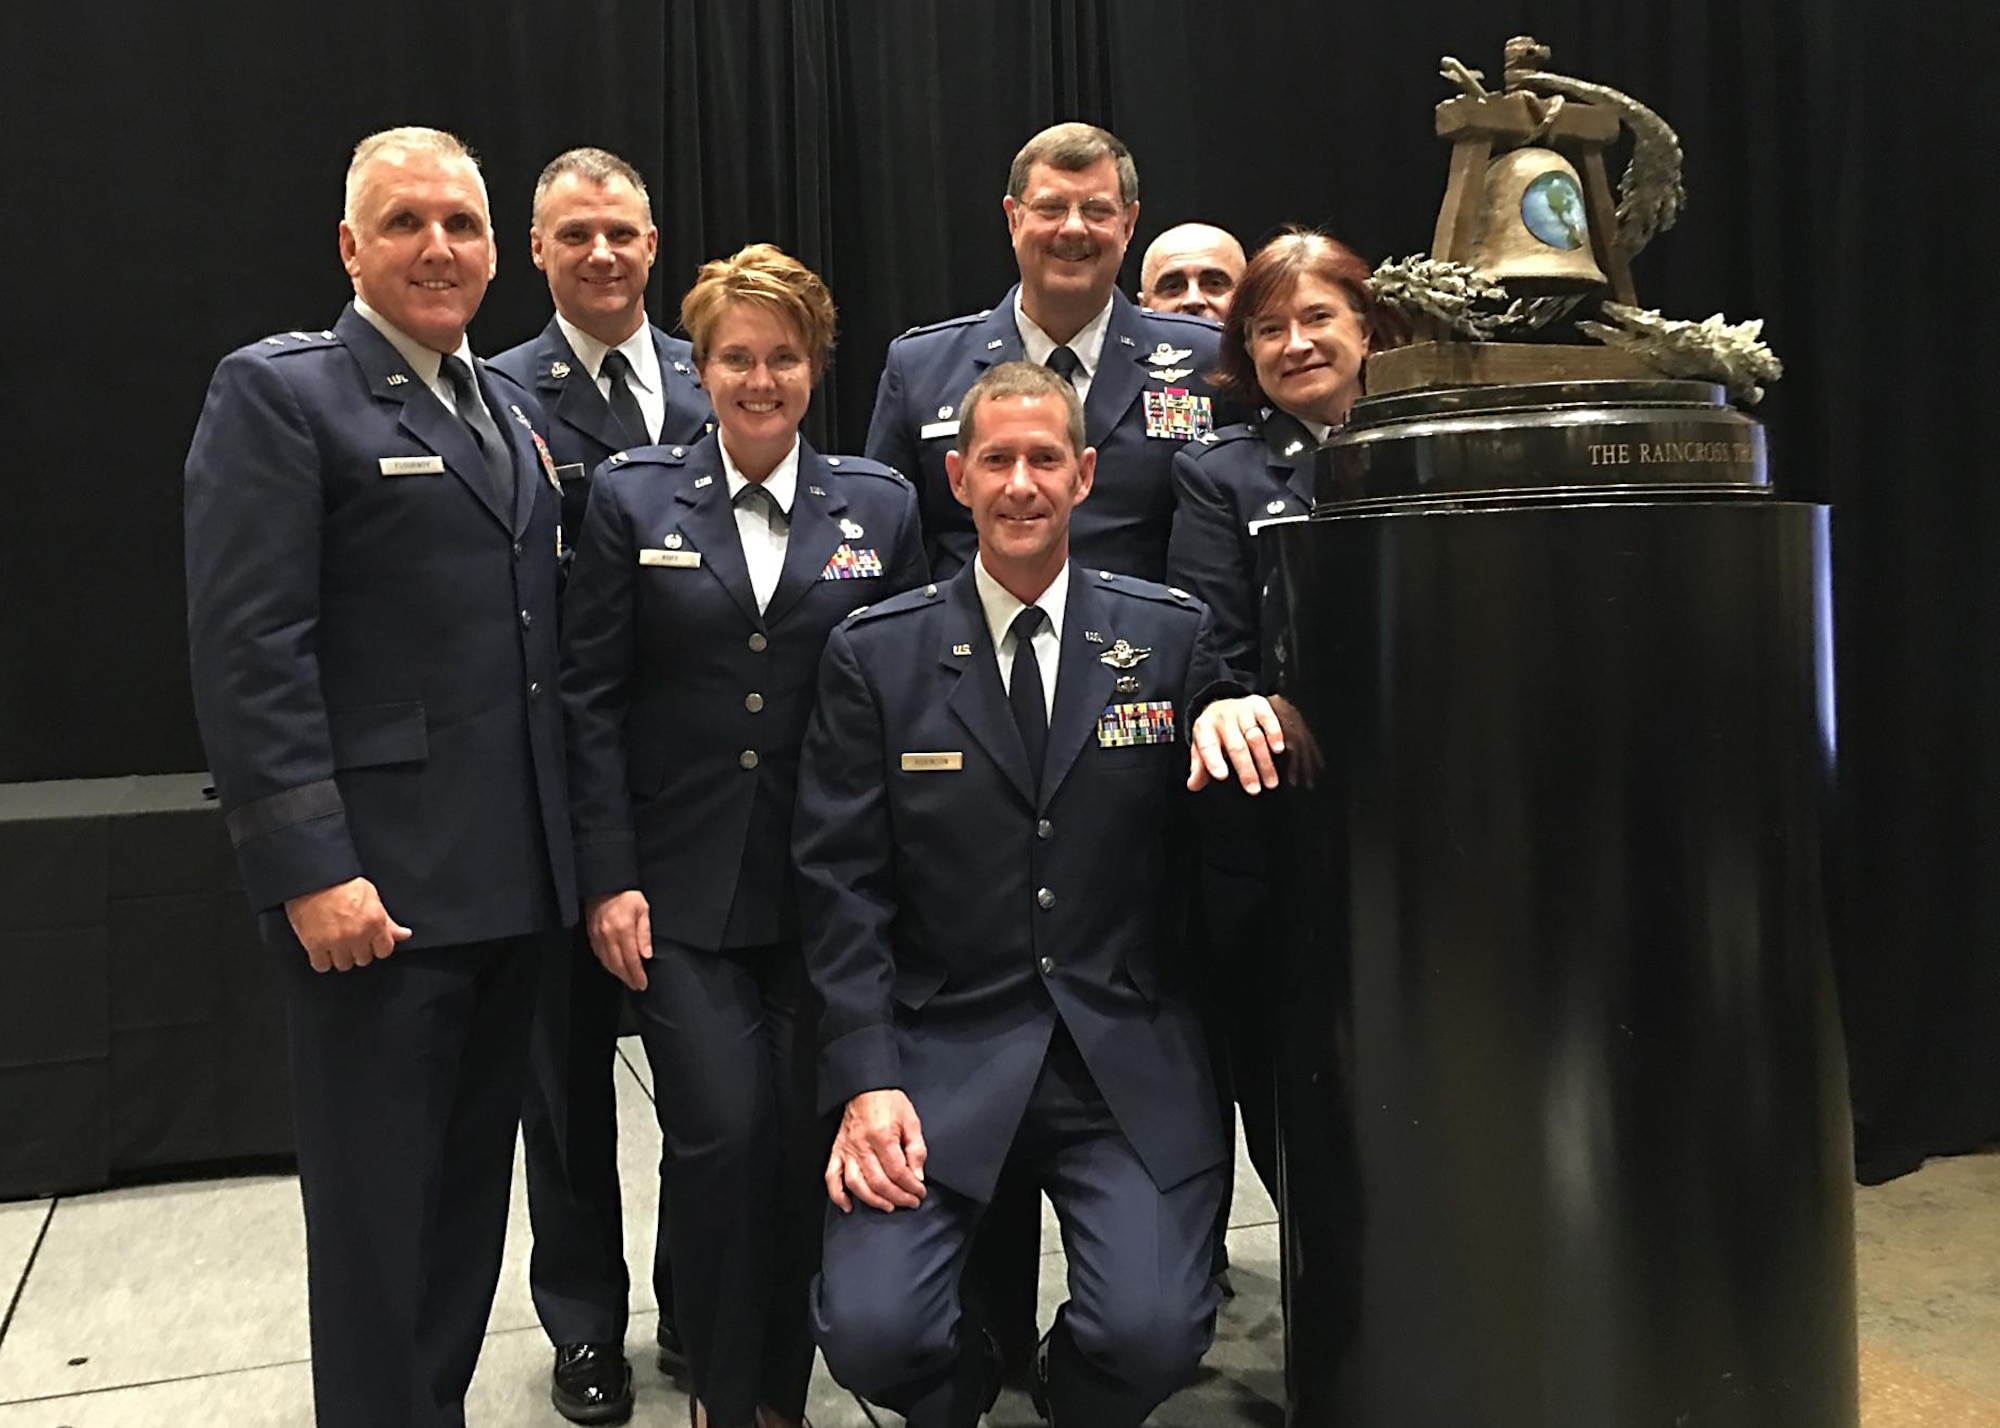 From Left, Maj. Gen. John Flournoy Jr, 4th Air Force commander;  Chief Master Sgt. Mark Barber, 315th Airlift Wing command chief; Col. Cherie Roff, 315th Mission Support Group commander; Lt. Col. John Robinson, 315th Operations Group vice commander (seated); Col. Gregory Gilmour, 315th AW commander; Tech Sgt. Tim Kelly, 315th AW Safety; and Col. Sharon Johnson, incoming 315th Maintenance Group commander, pose with the Raincross Trophy Oct. 20 after the 315th AW received the award at the Raincross Trophy Dinner in Riverside, California. (Courtesy photo)